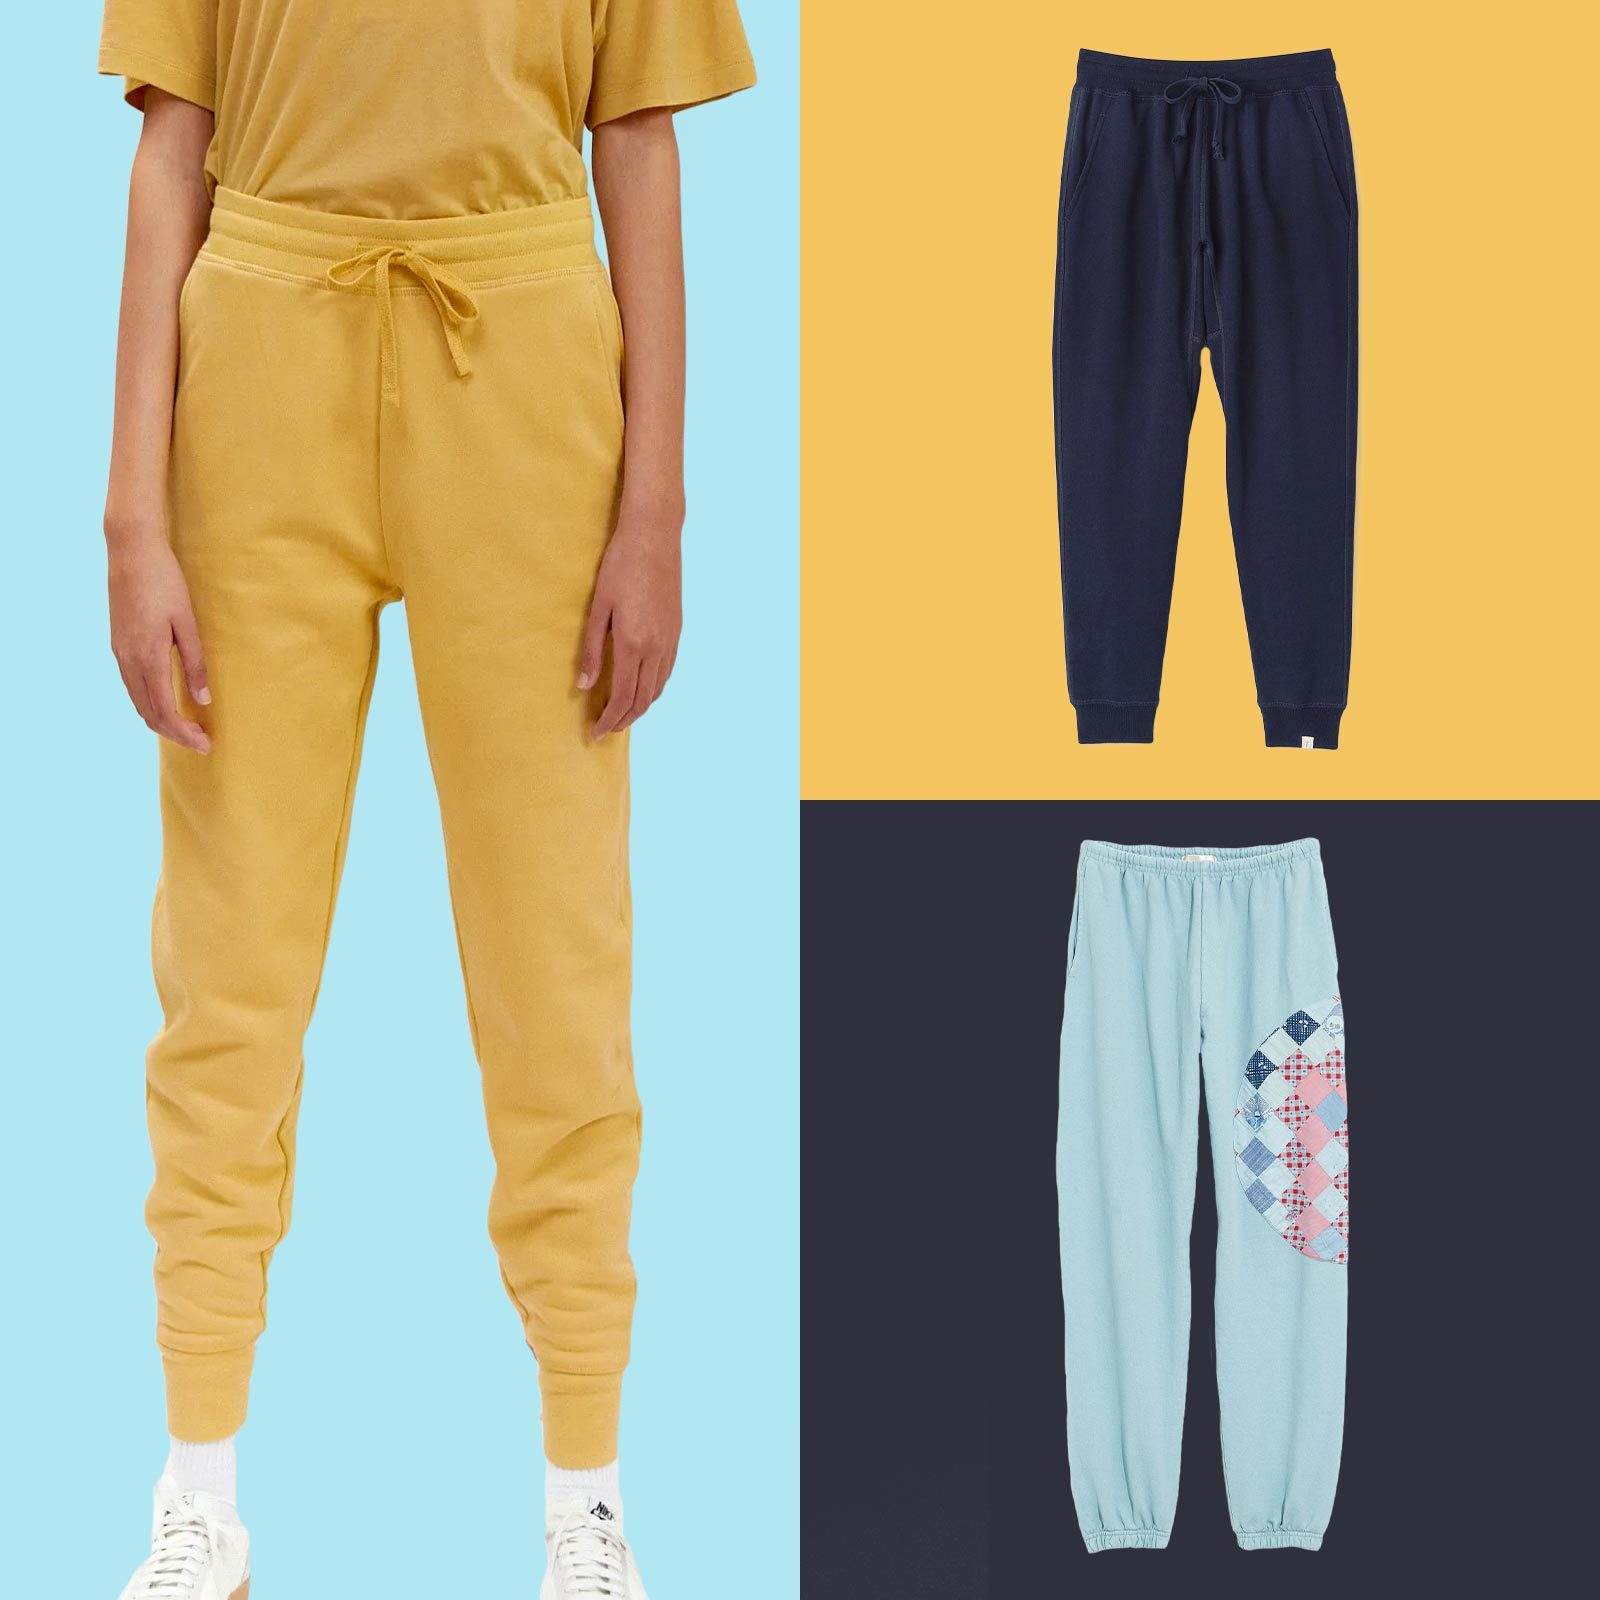 22 Best Sweatpants for Women 2022 | Joggers, Cashmere and More